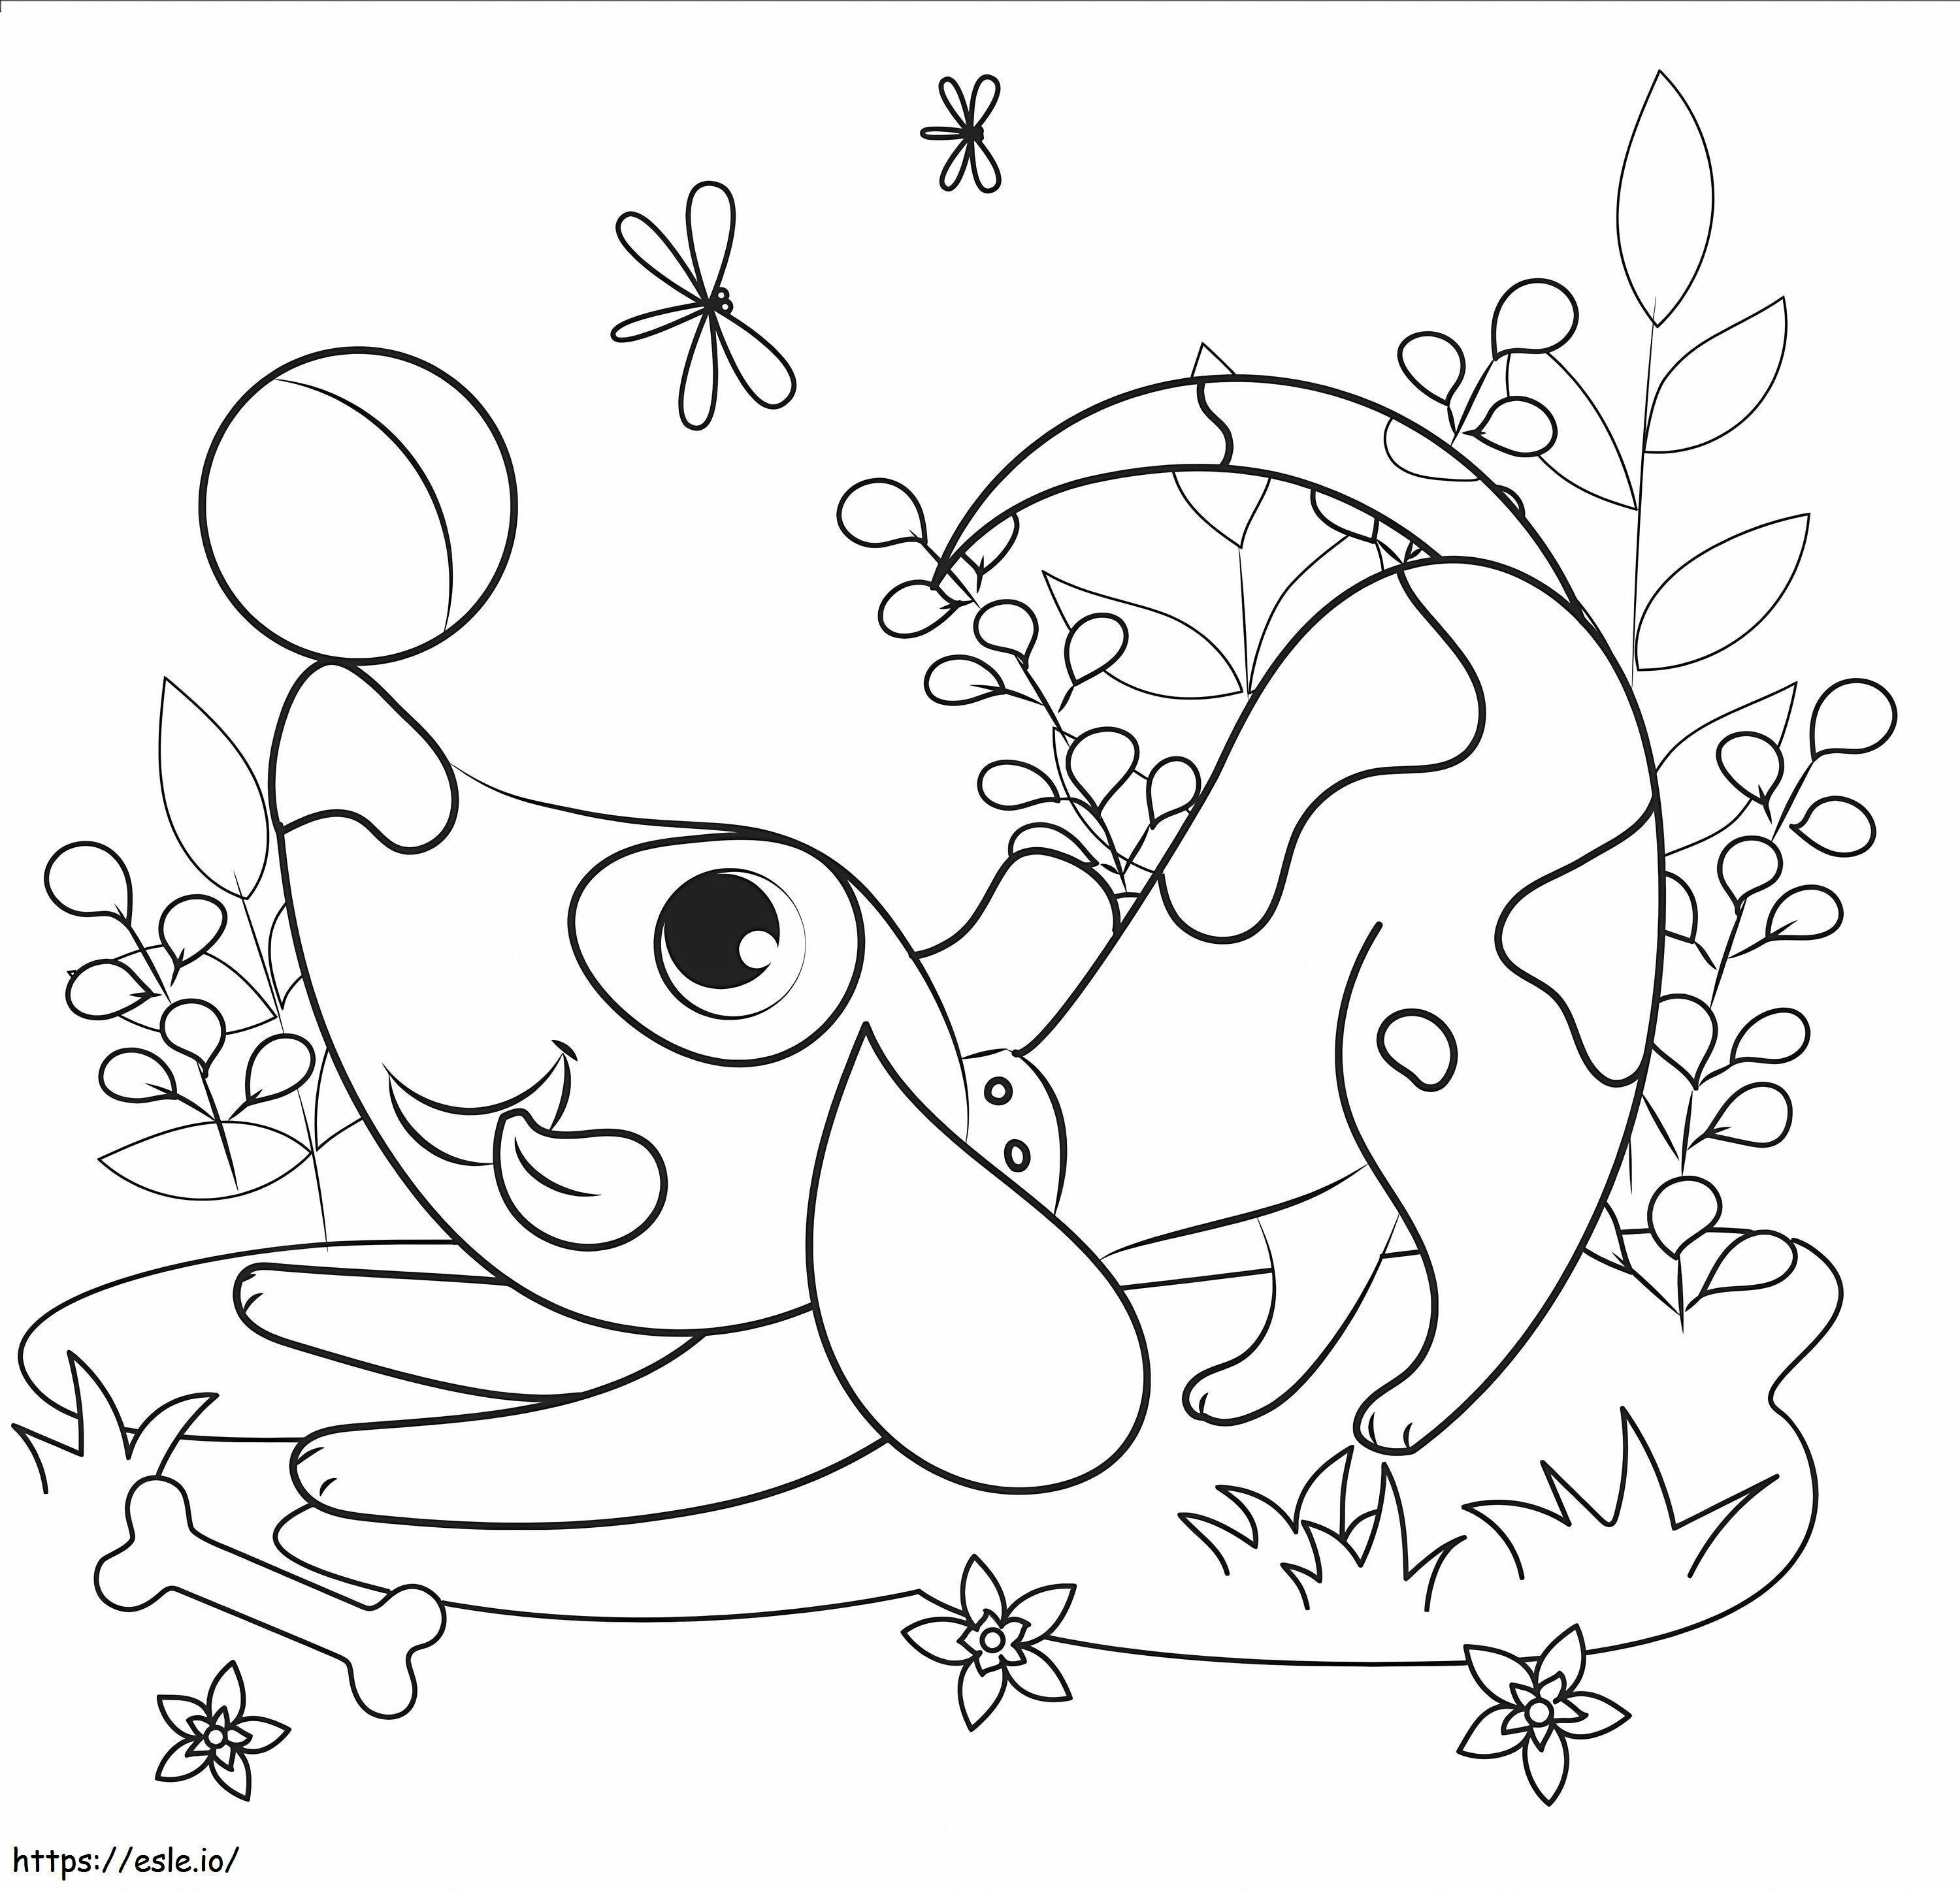 Funny Dog With Ball coloring page